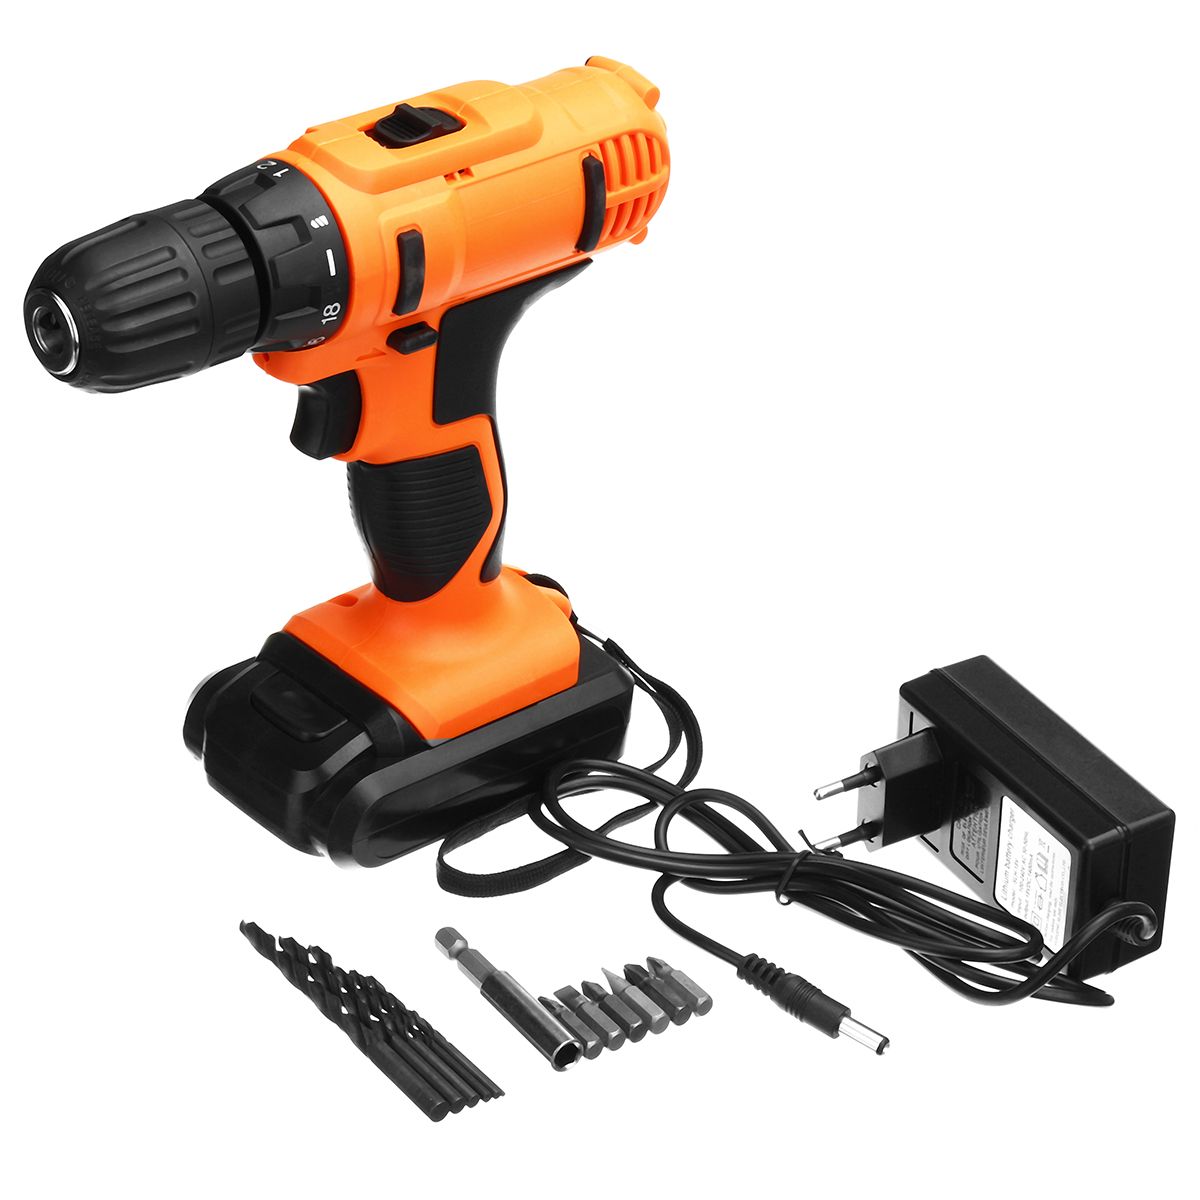 18V-Electric-Screwdriver-Cordless-Hammer-Impact-Power-Drill-Driver-Rechargeable-with-13Pcs-Drill-Bit-1324472